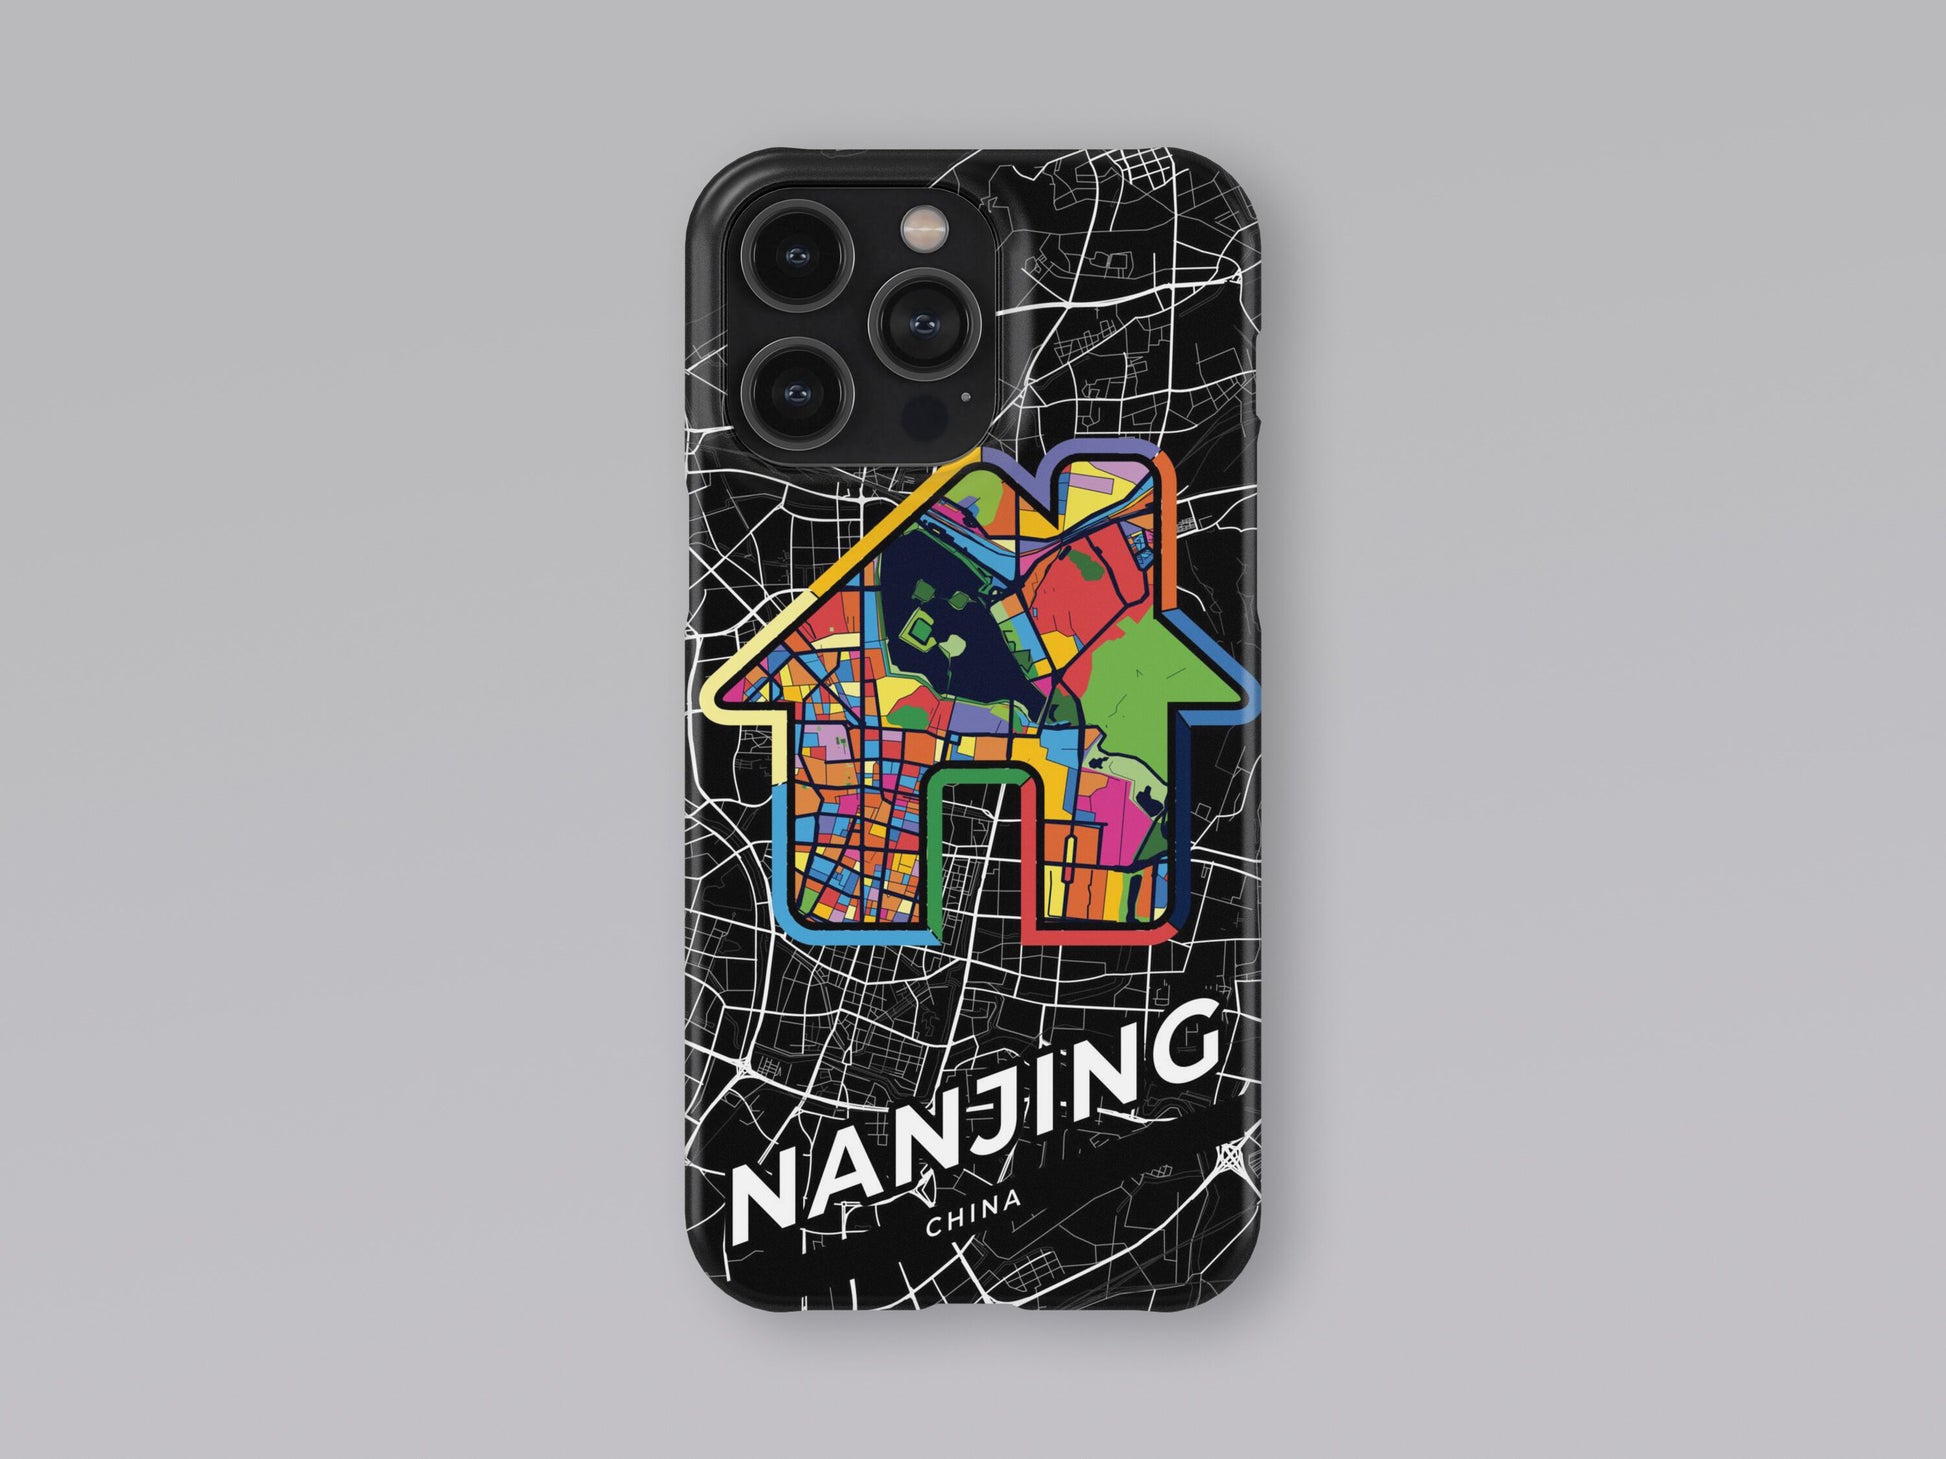 Nanjing China slim phone case with colorful icon. Birthday, wedding or housewarming gift. Couple match cases. 3